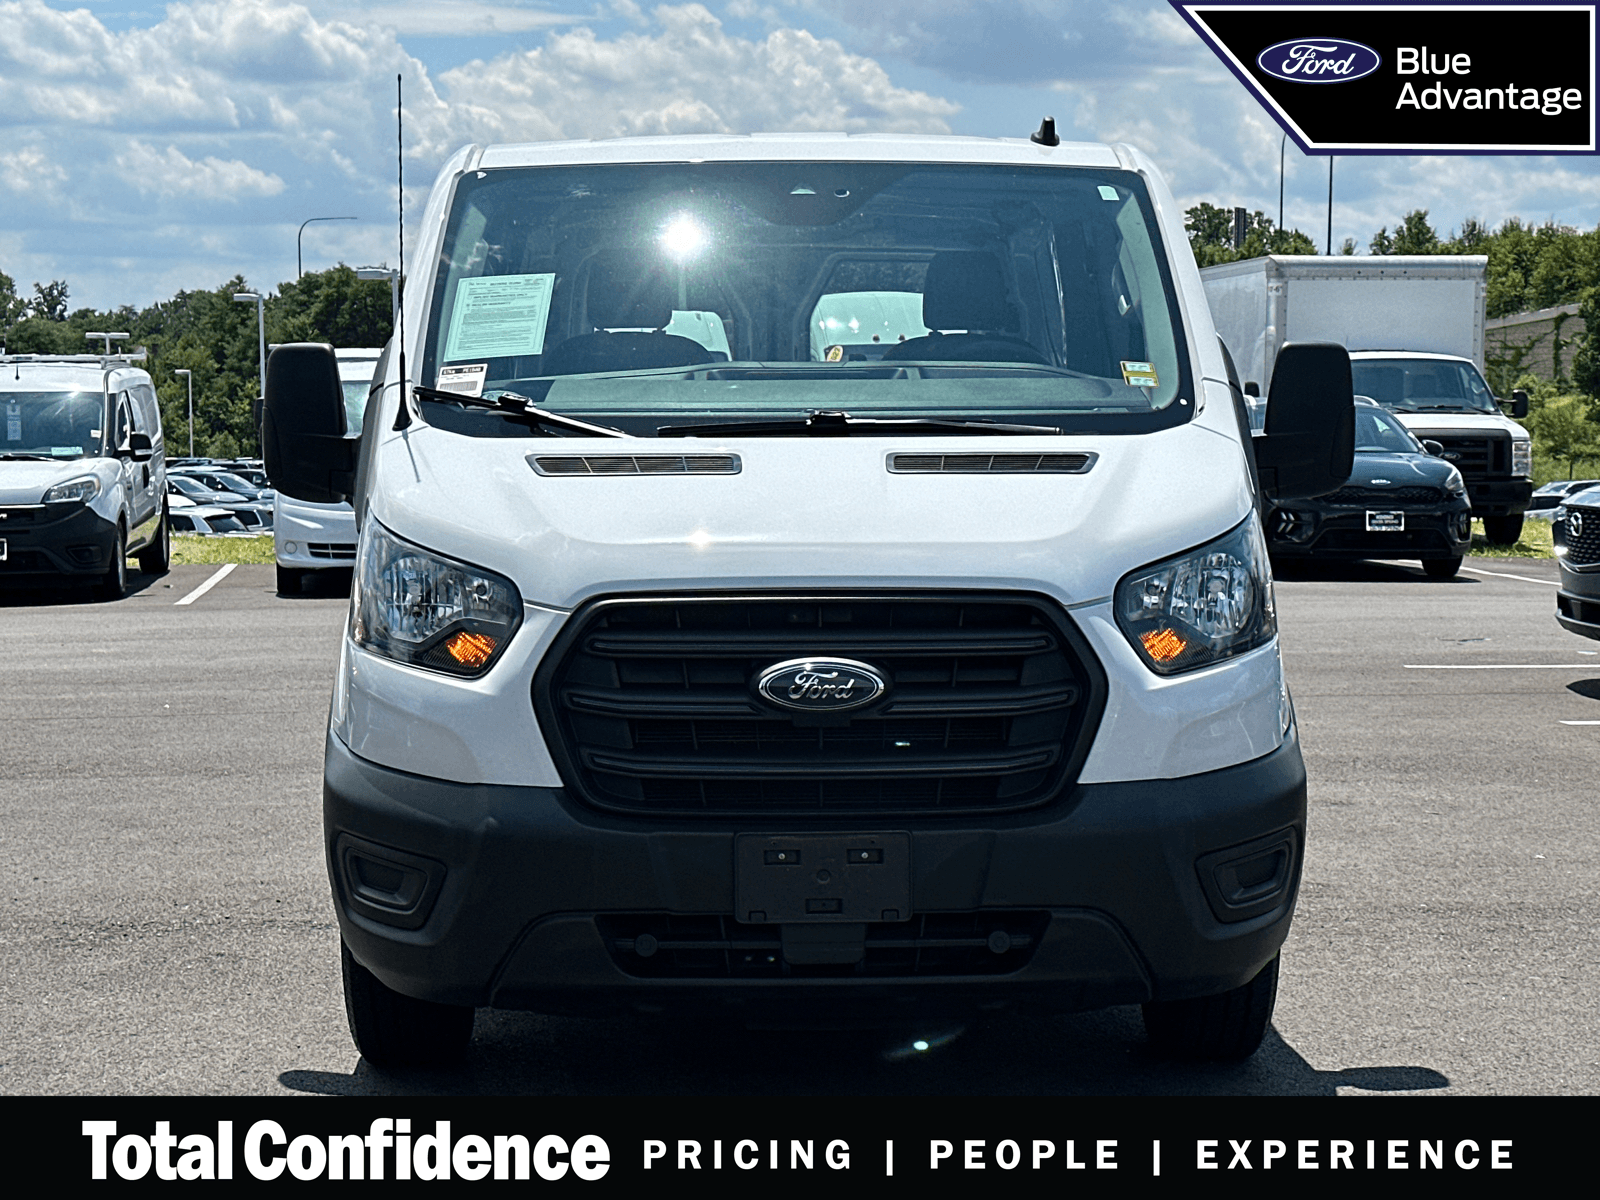 2020 Ford Transit-250 Photo in Bethesda, MD 20814